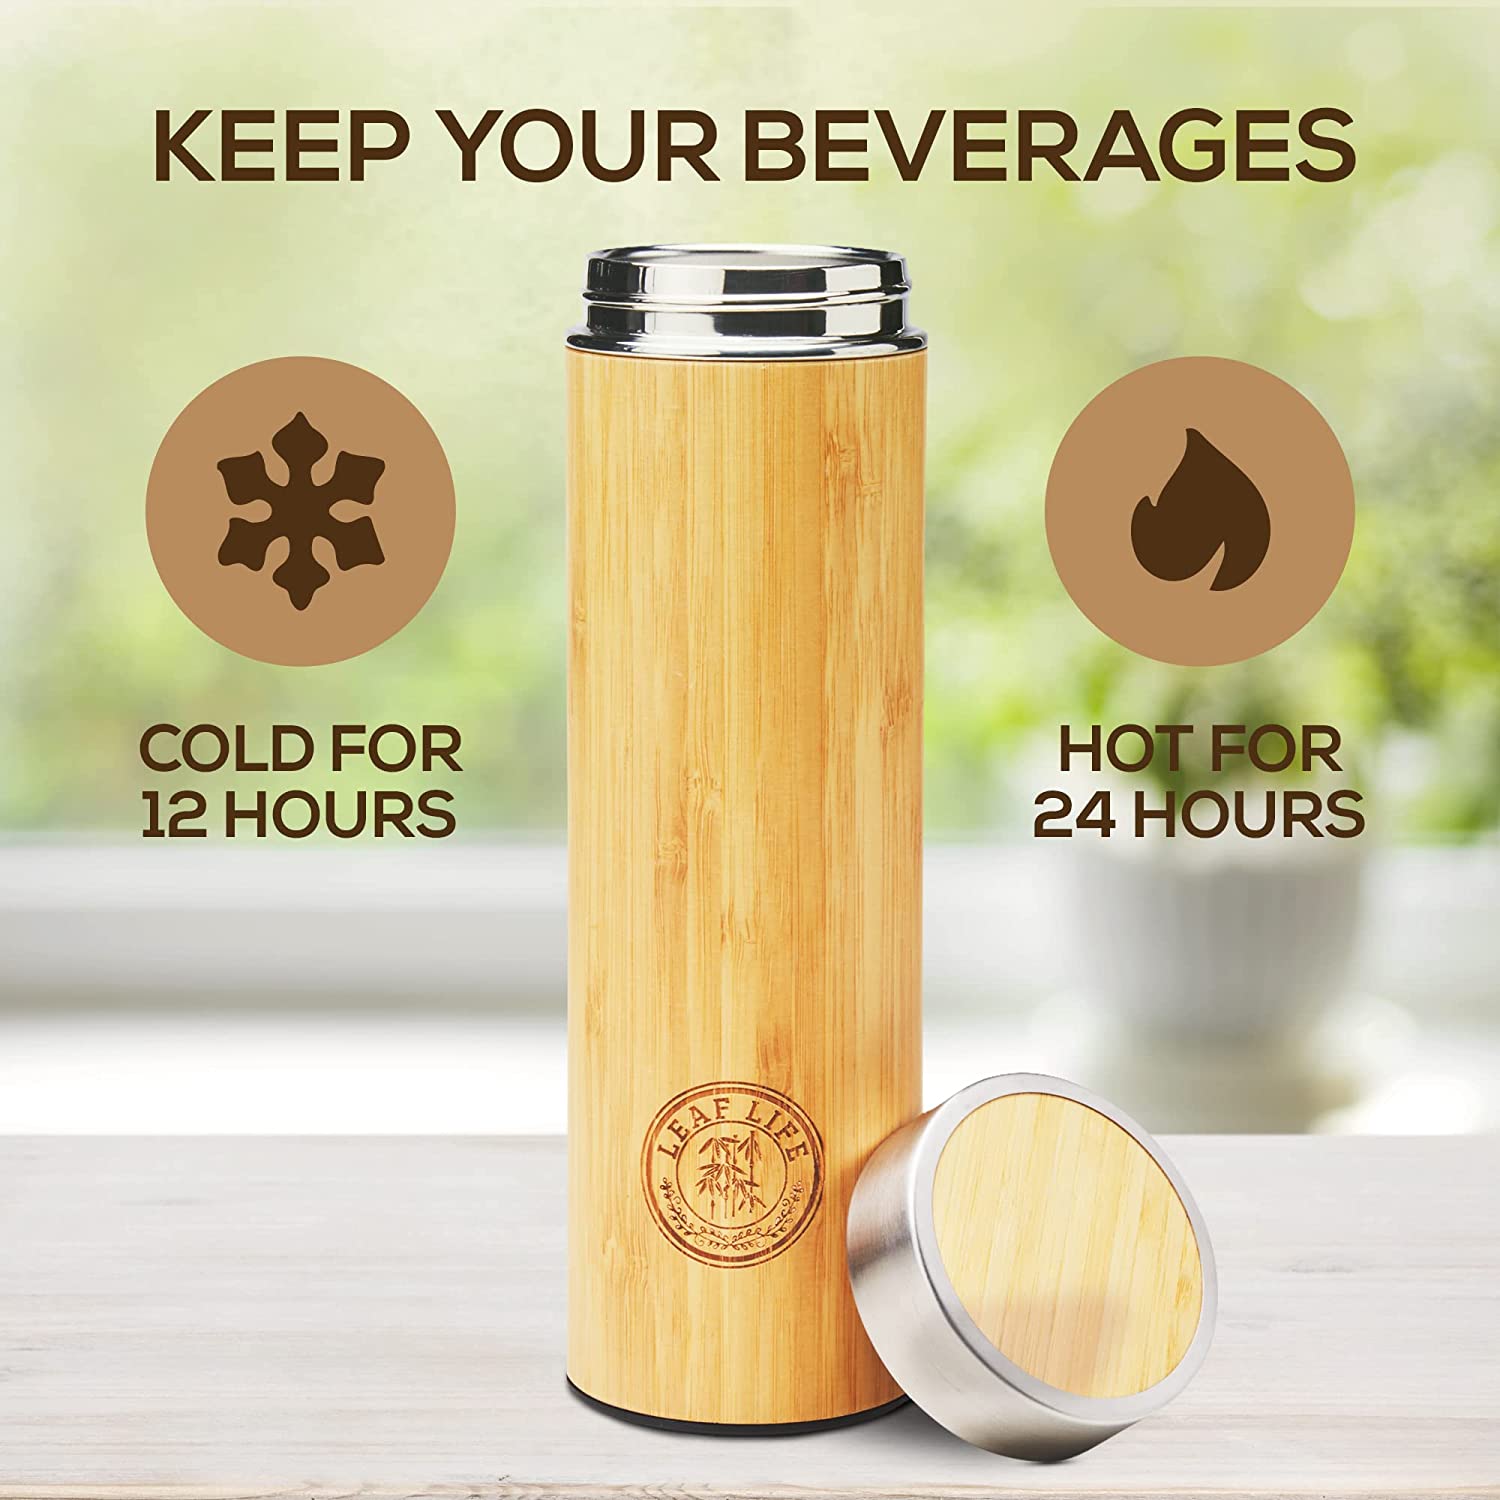 LeafLife Premium Bamboo Thermos with Tea Infuser & Strainer 17oz capacity - Keeps Hot & Cold for 12 Hrs - Vacuum Insulated Stainless Steel Travel Tea Tumbler Infuser Bottle for Loose Leaf Tea & Coffee - image 3 of 9